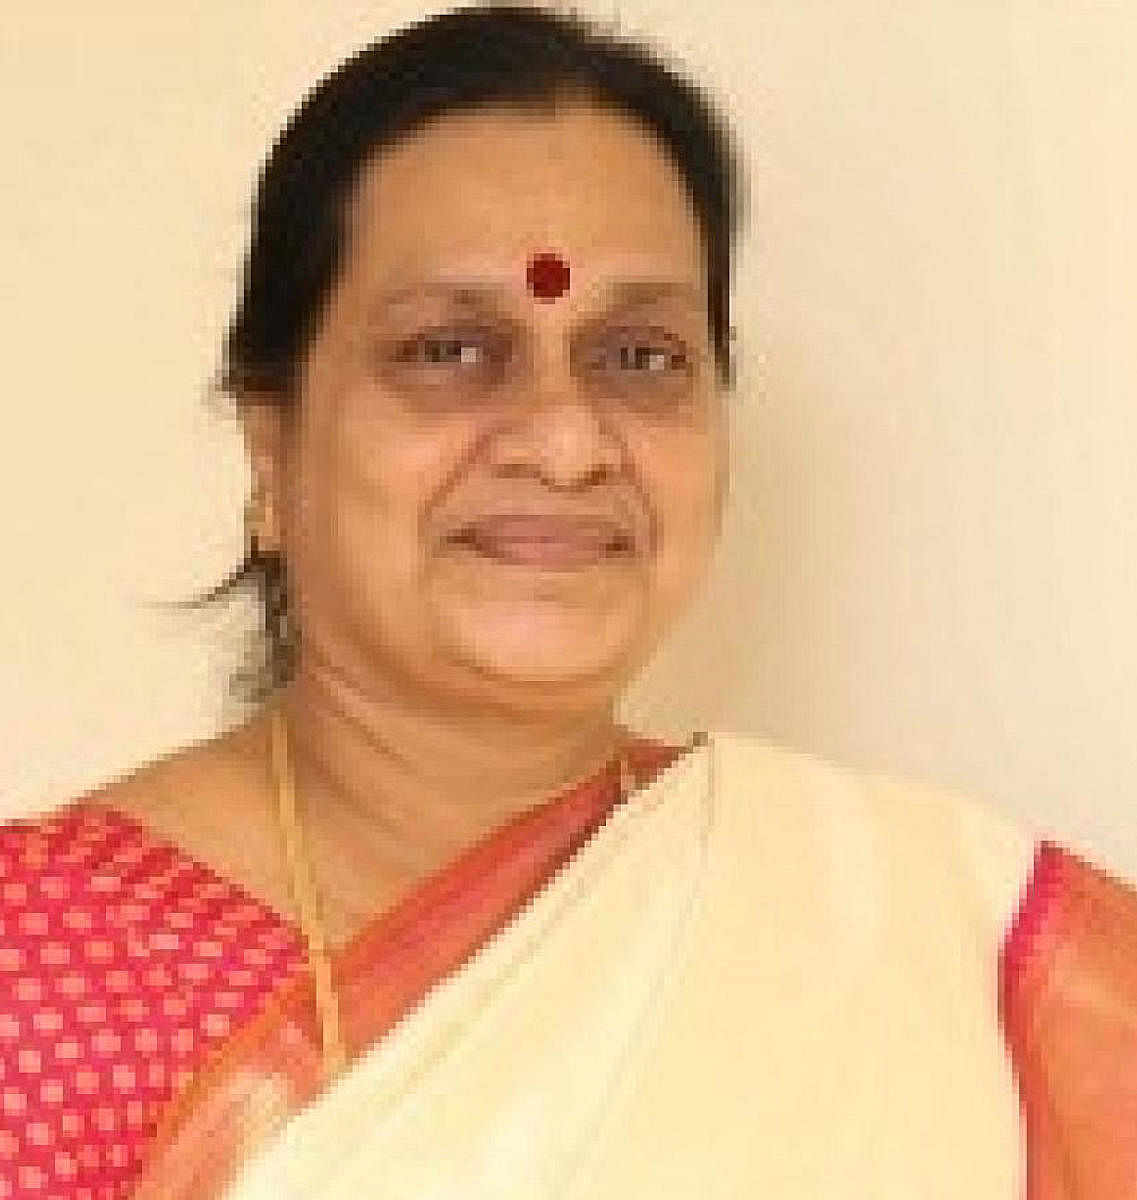 kannada film producer Jayashree Devi arrested by Chamarajpet police in a 12-year-old cheque bounce case.